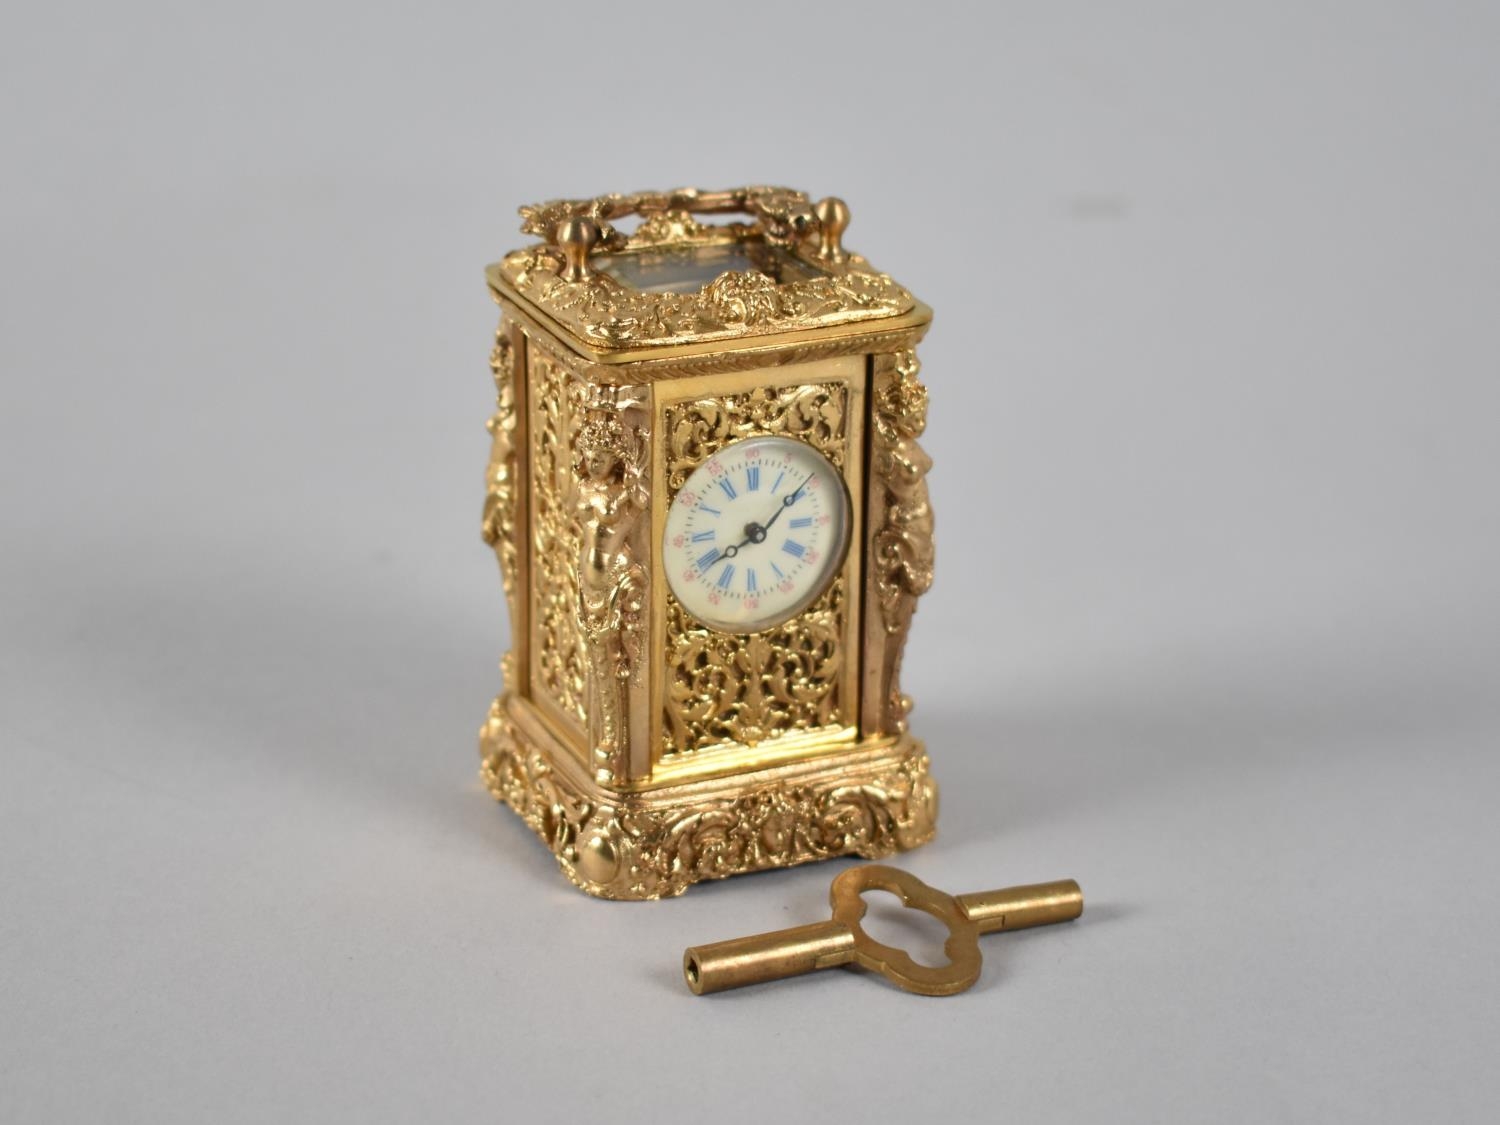 A Reproduction Ornate Gilt Brass Miniature Carriage Clock with White Enamelled Dial, Complete with